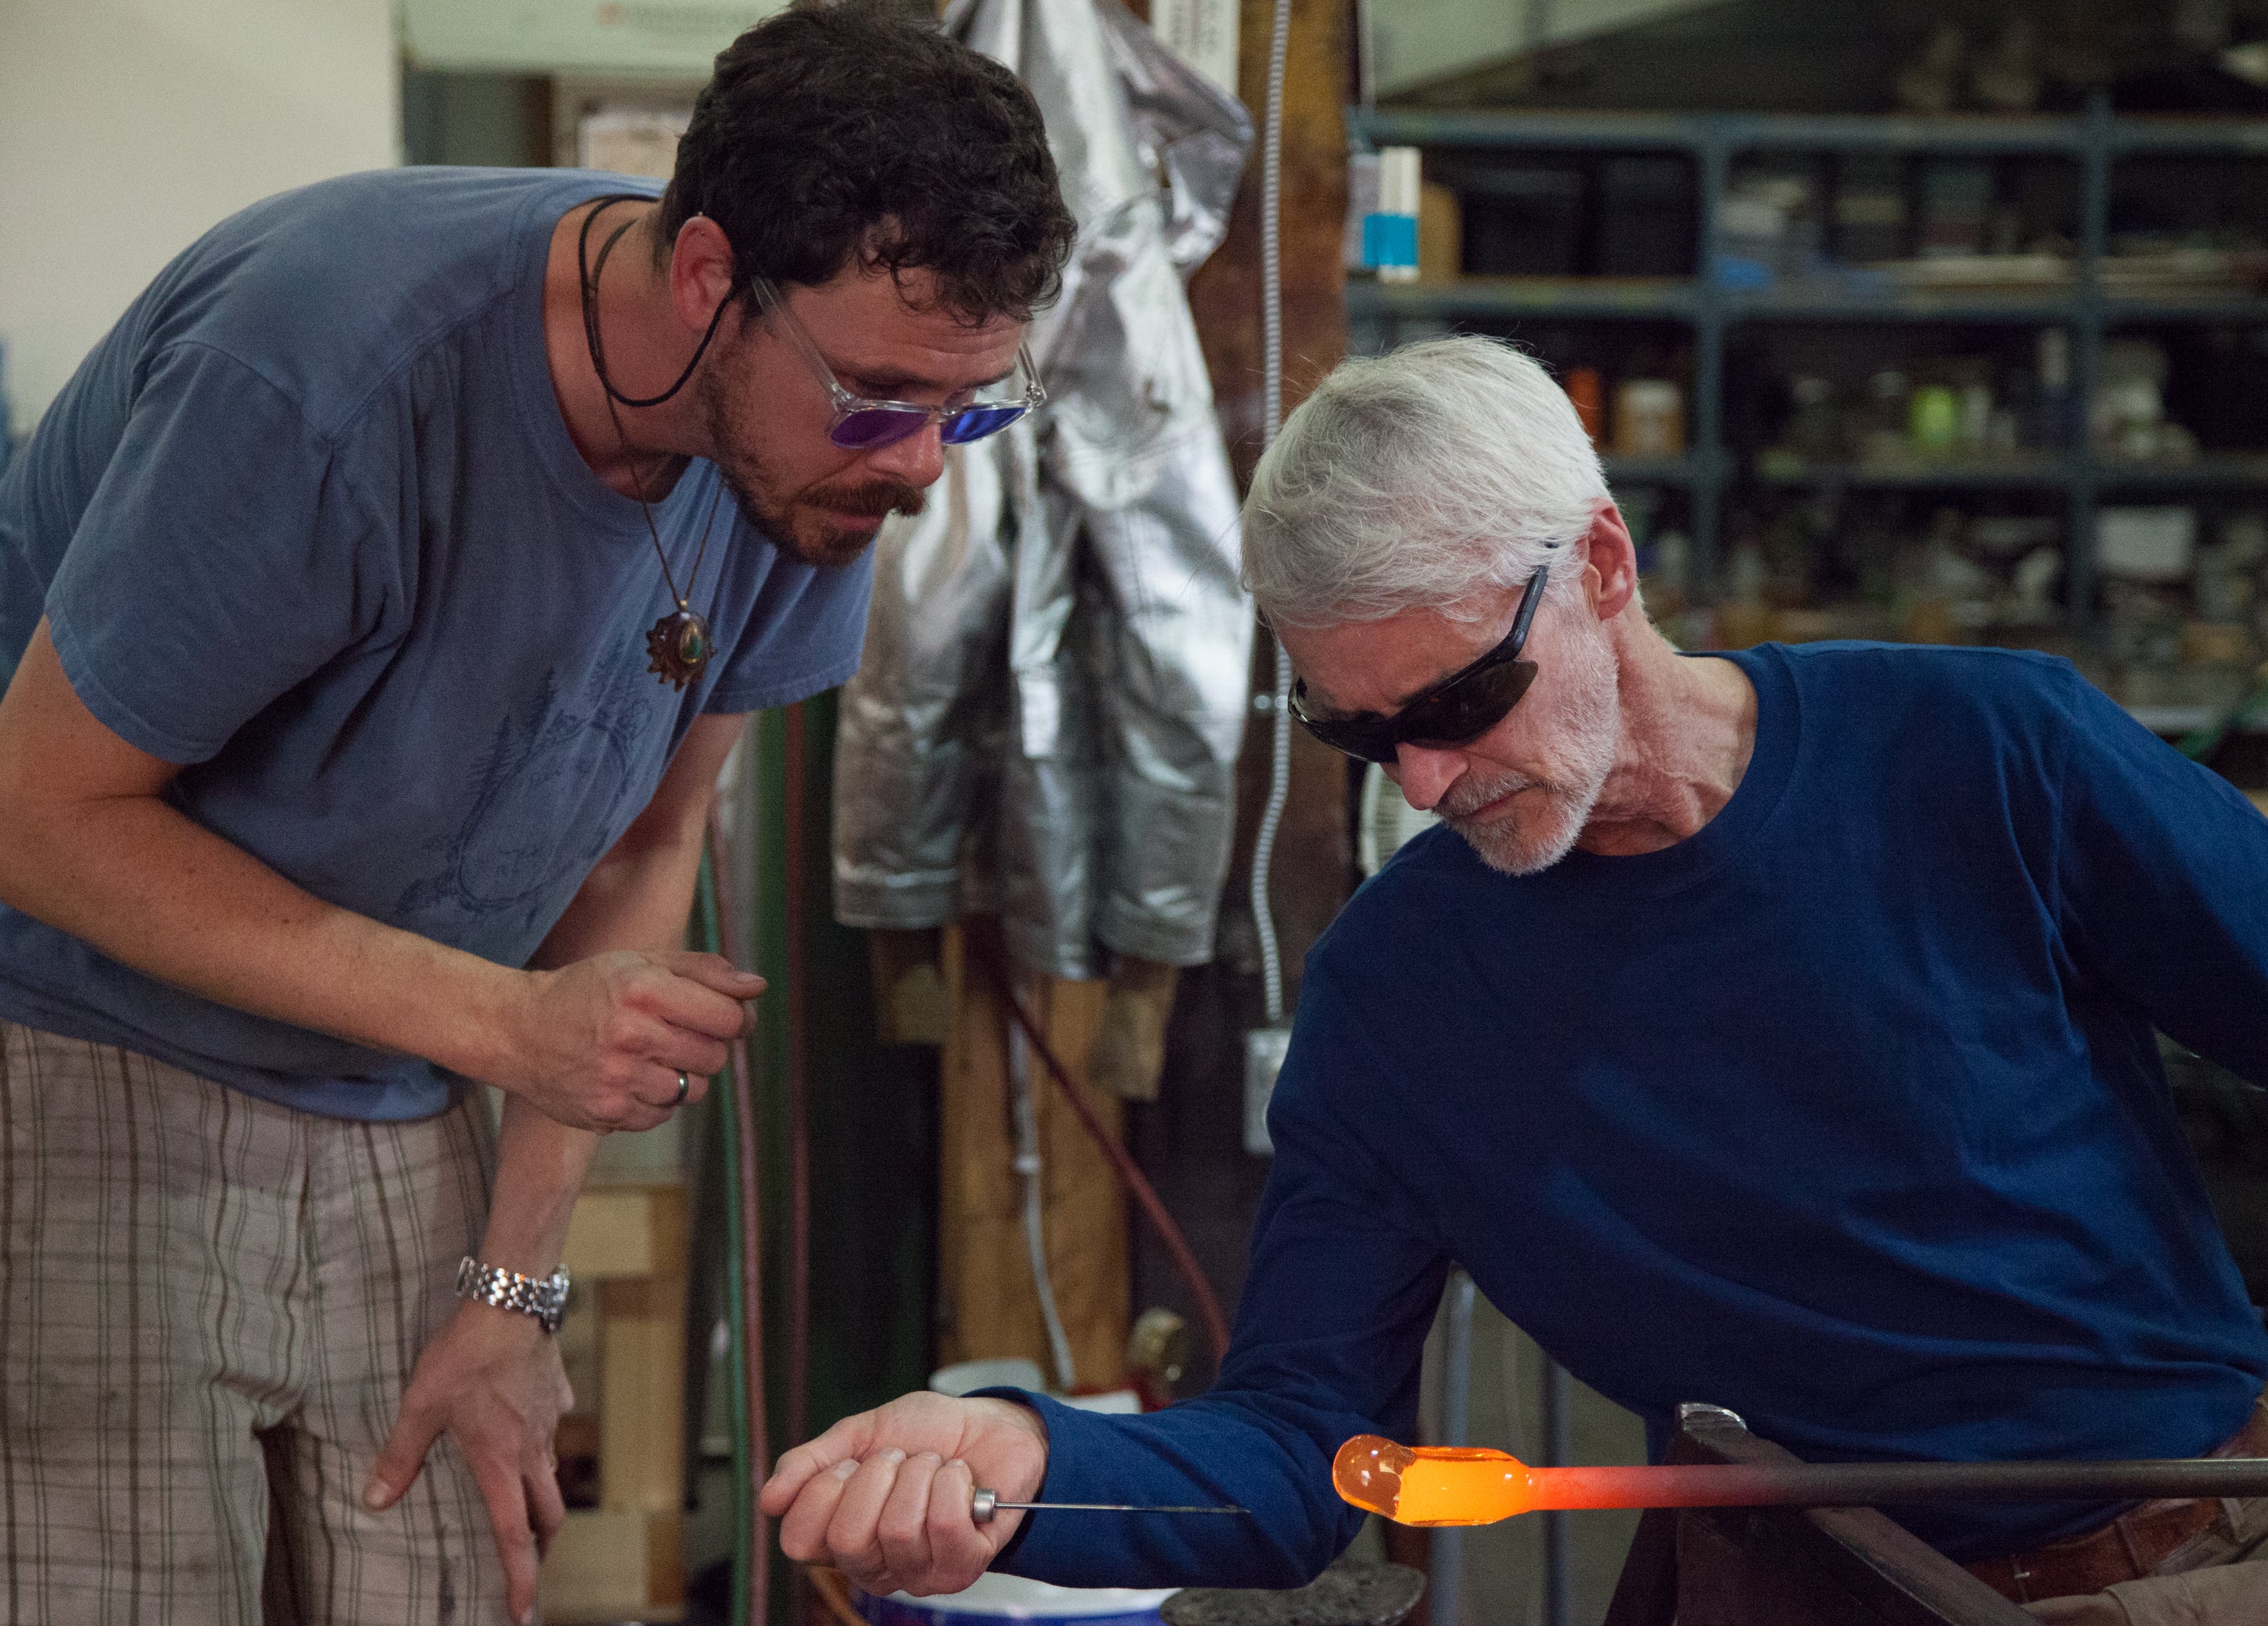 A concentrated glassblowing session in progress, featuring two individuals in safety glasses focused on shaping a hot, glowing piece of molten glass. The elder artisan holds the glassblowing pipe, shaping the viscous material, while the younger one observes closely, set against a backdrop of a cluttered workshop filled with tools of the trade.